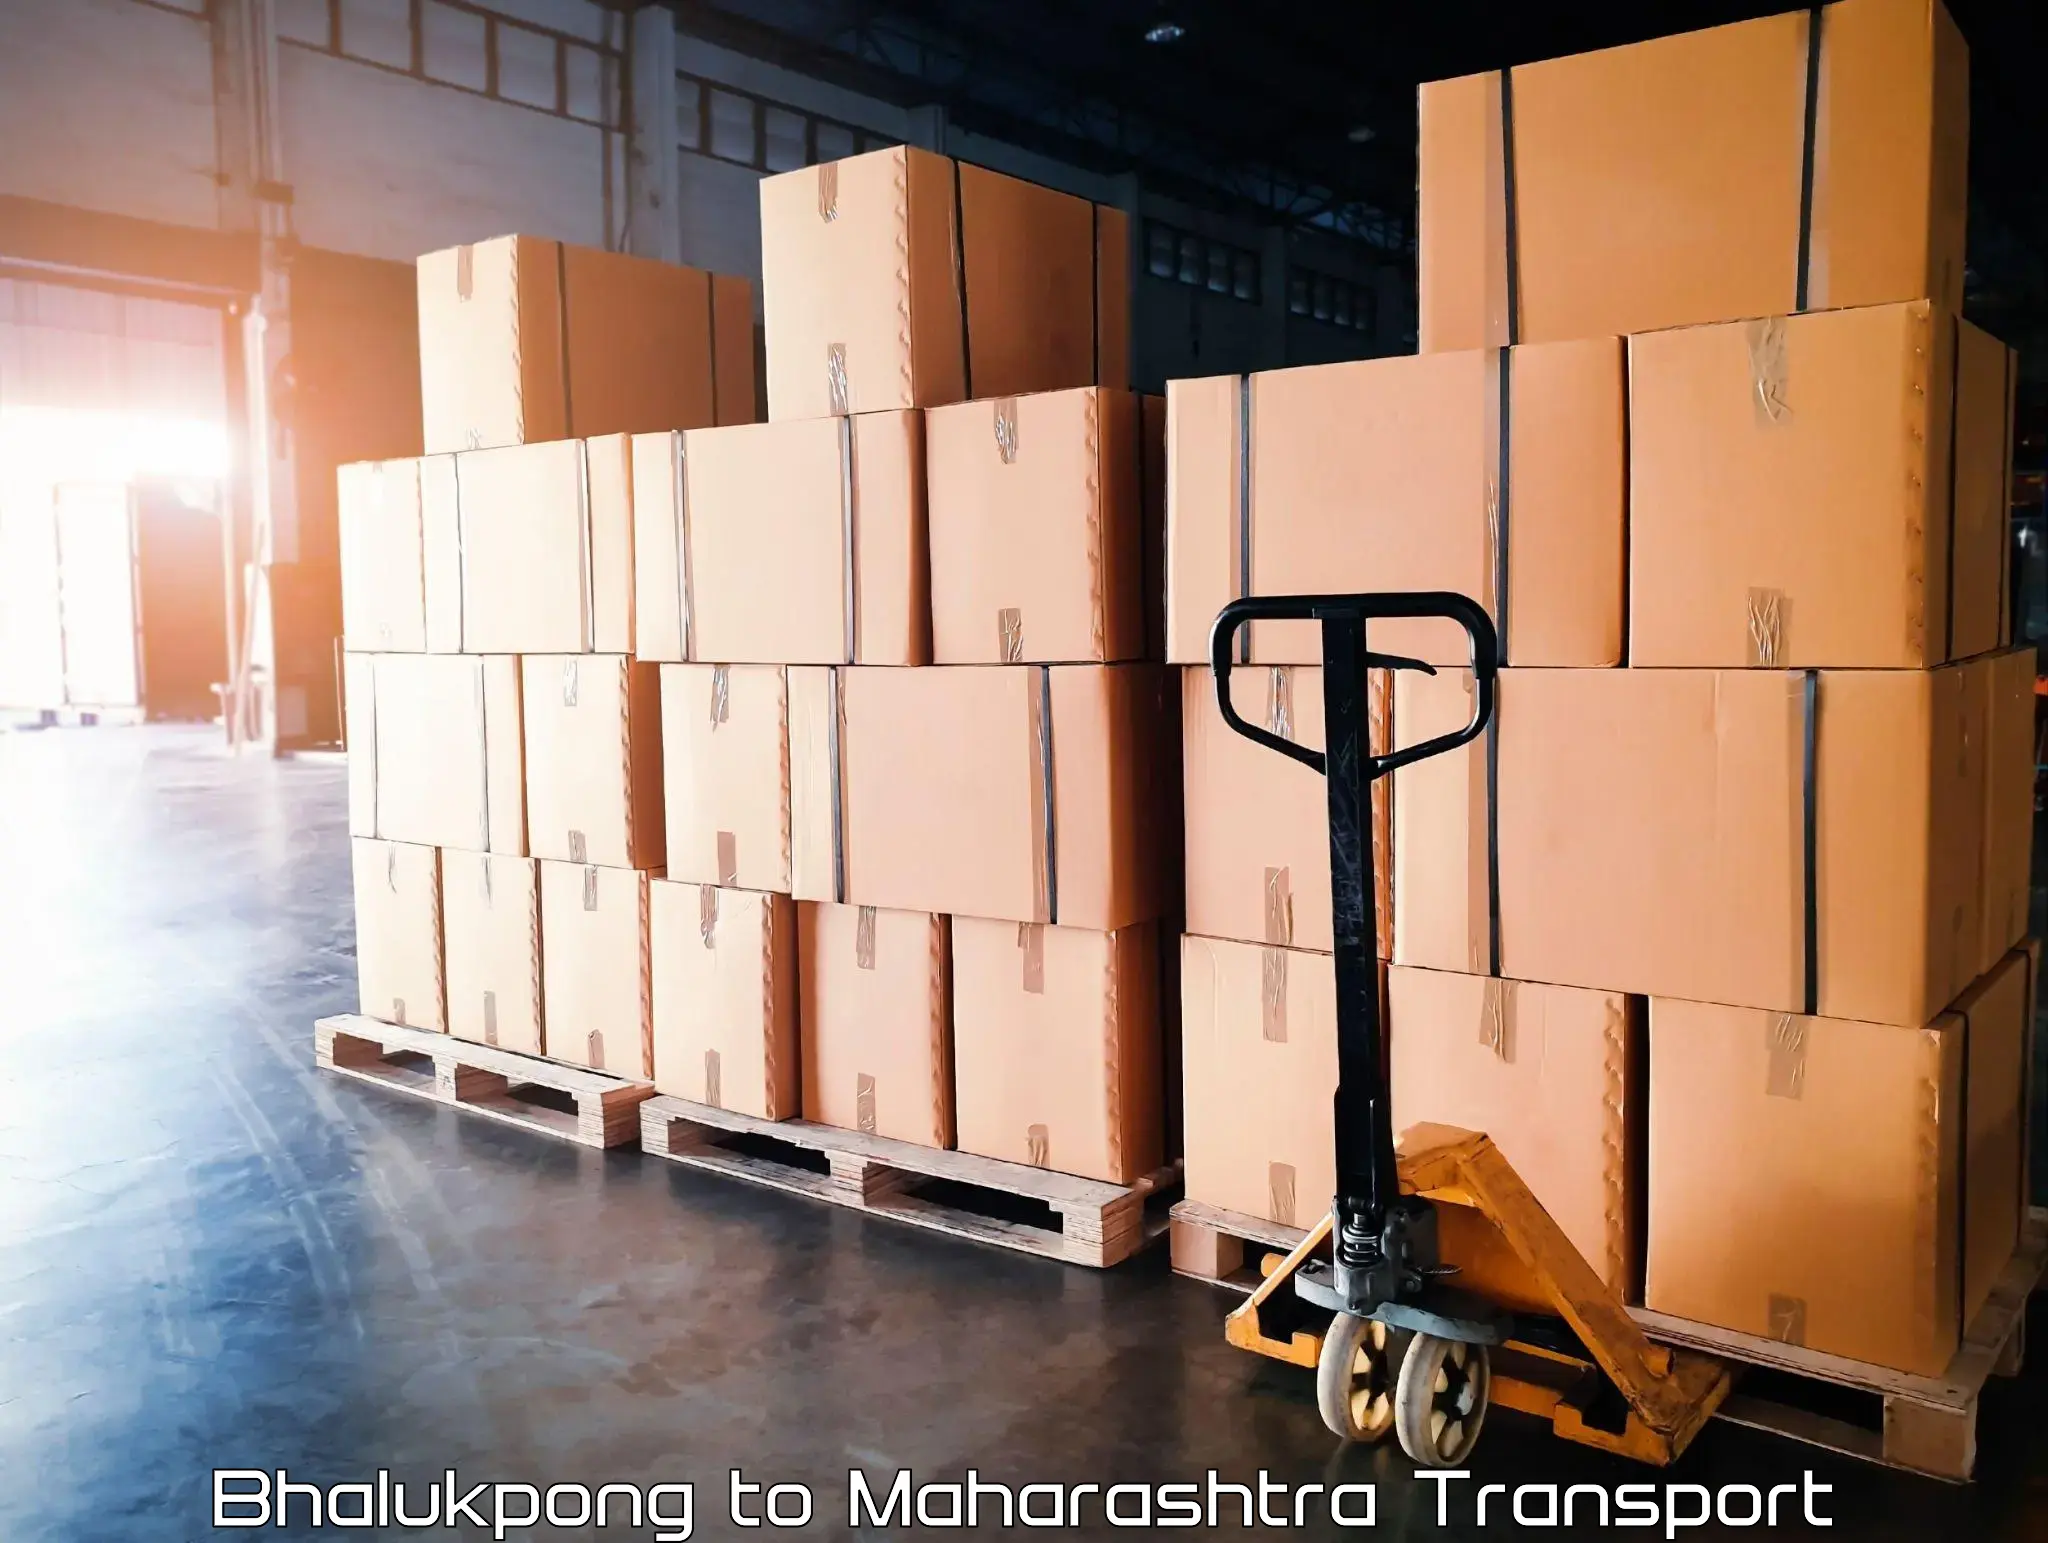 Express transport services in Bhalukpong to Nagpur